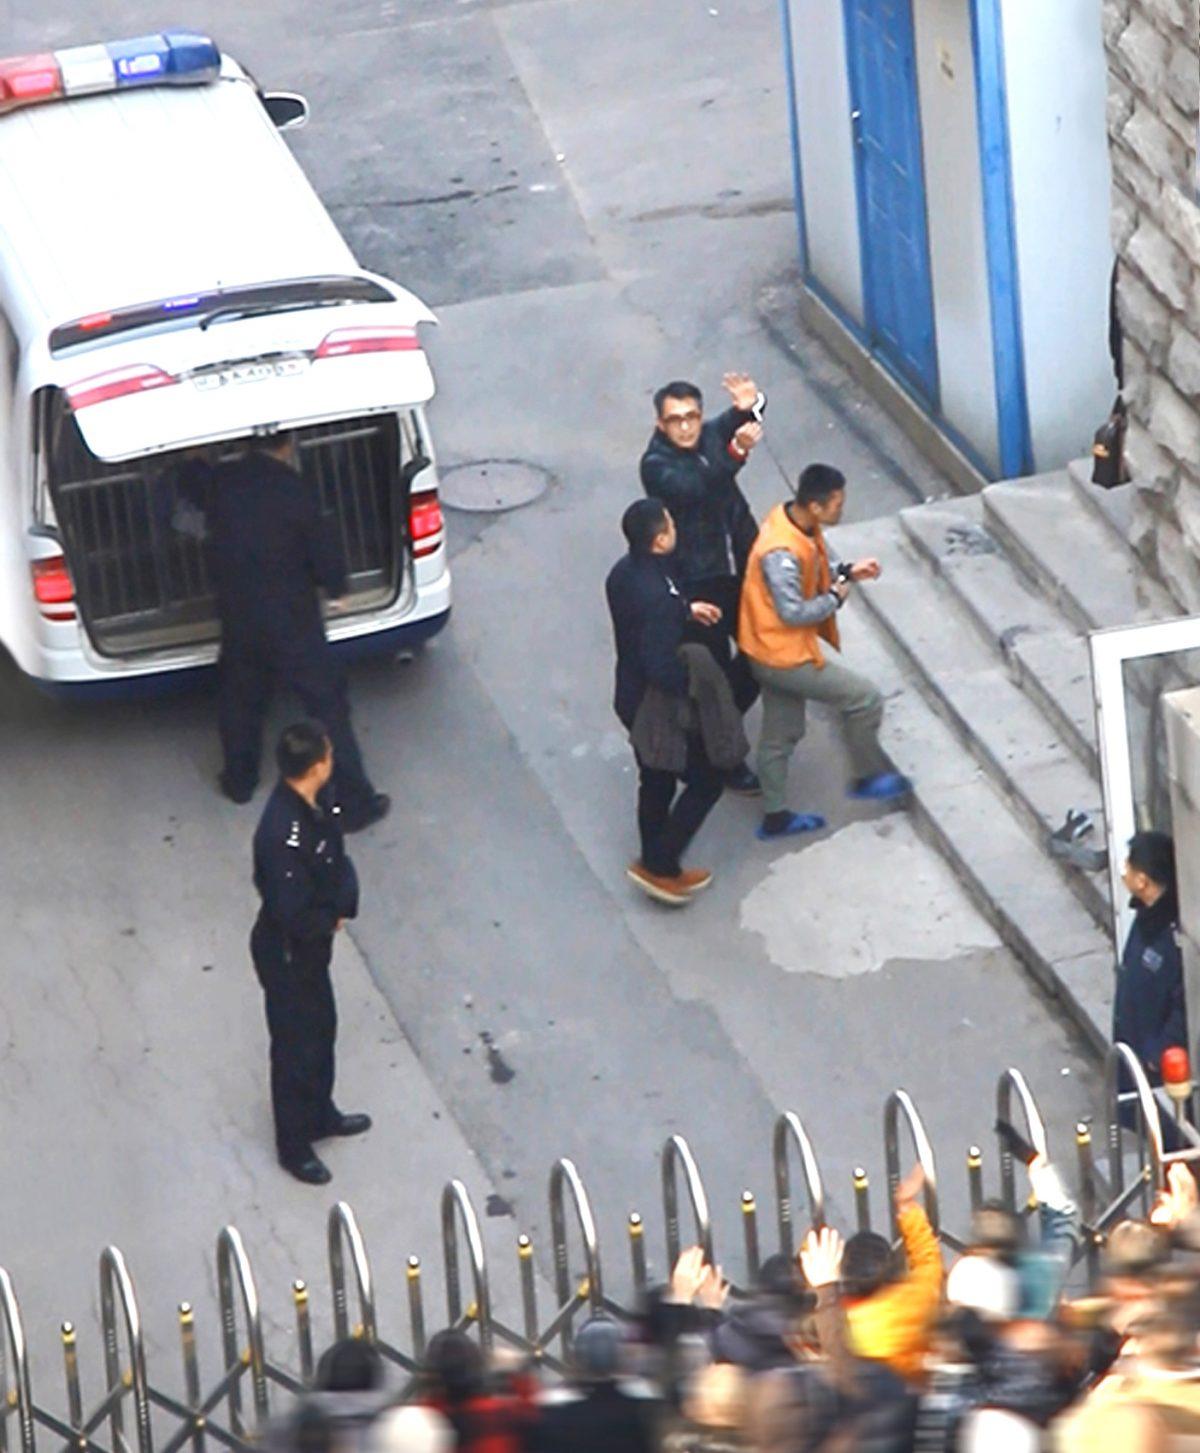 Yu Ming, holding up his handcuffed hands, arrives at the court in Shenyang City on Nov. 20, 2014. (Minghui.org)